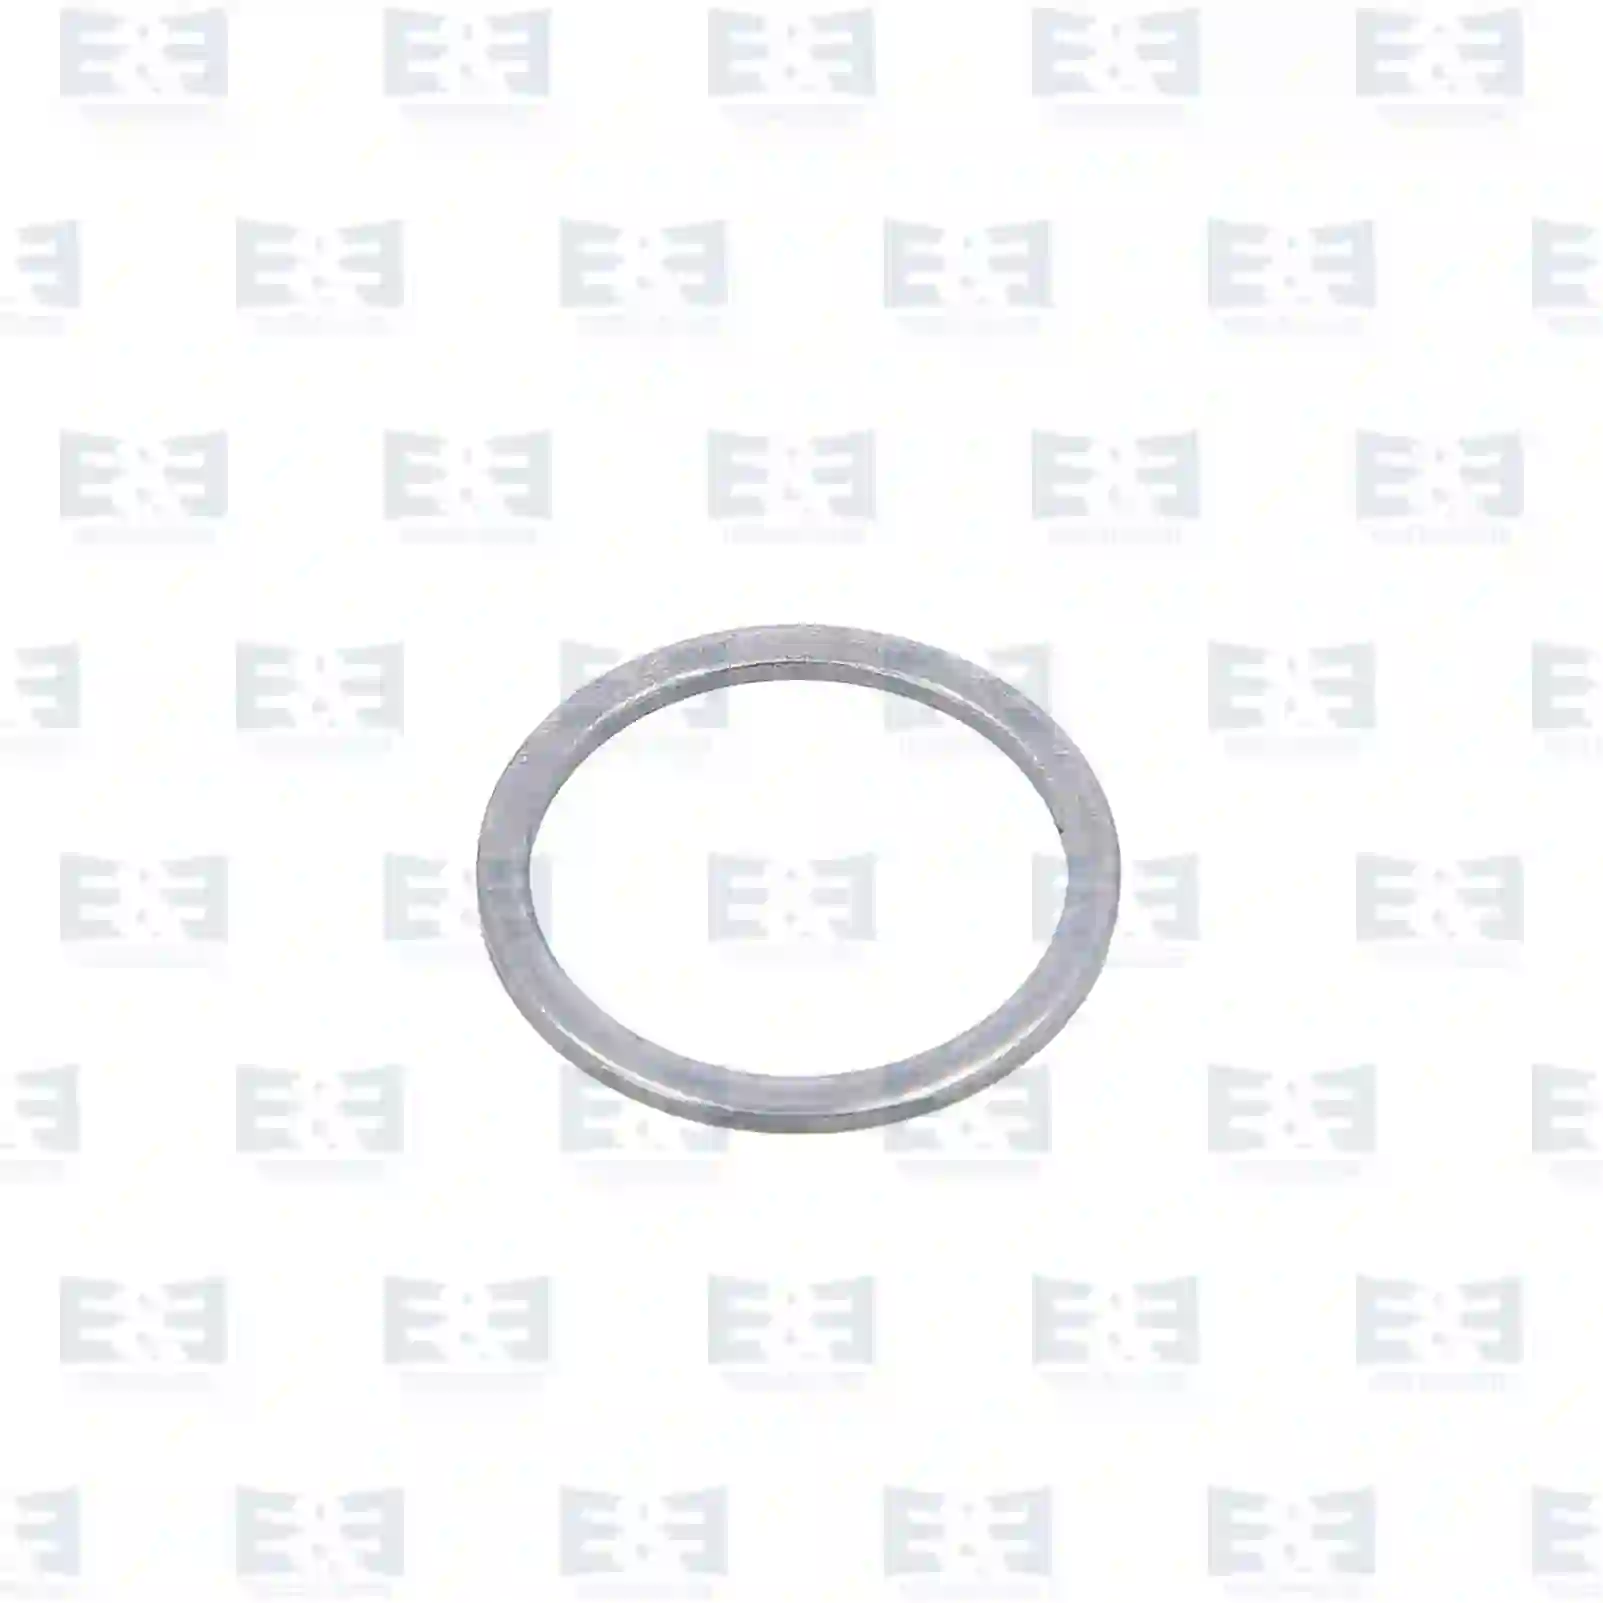  Steel washer || E&E Truck Spare Parts | Truck Spare Parts, Auotomotive Spare Parts